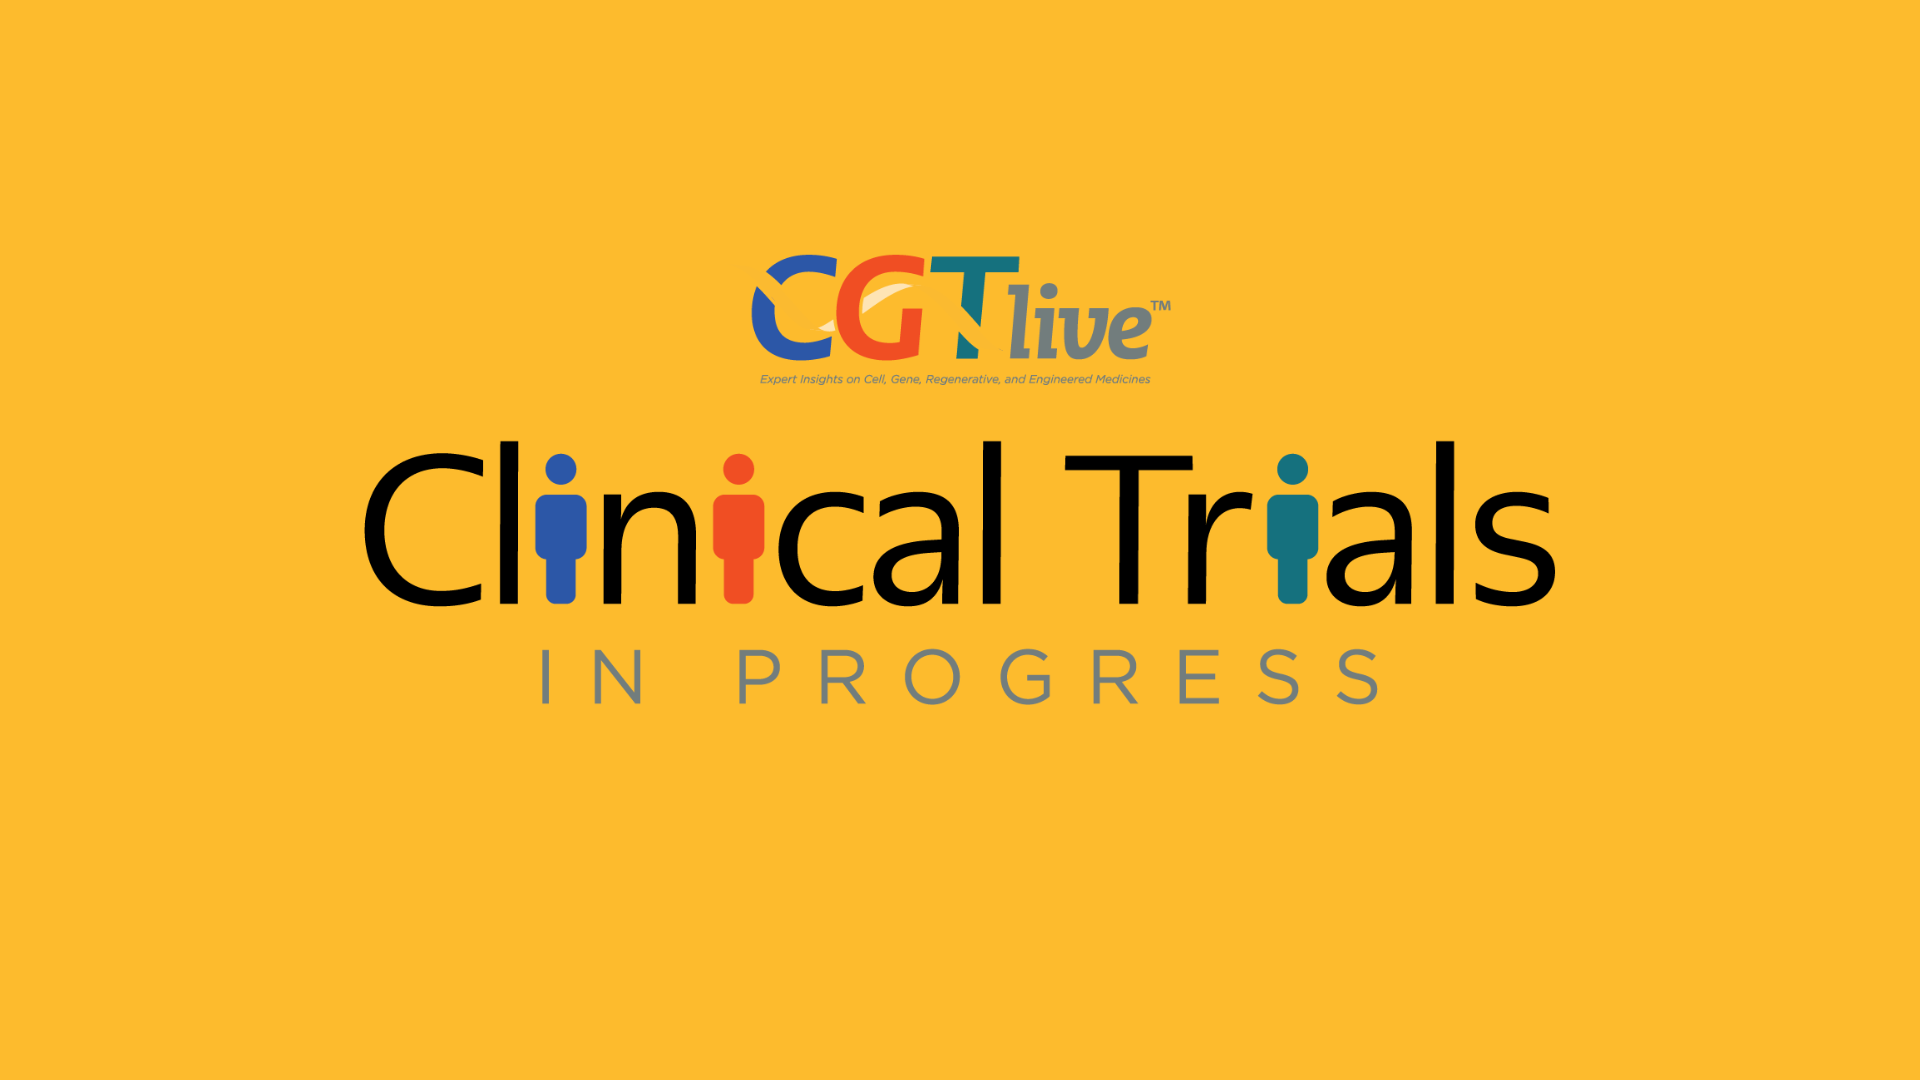 Direct Biologics’ Phase 1 Clinical Trial Seeks to Treat Crohn Disease With Extracellular Vesicles